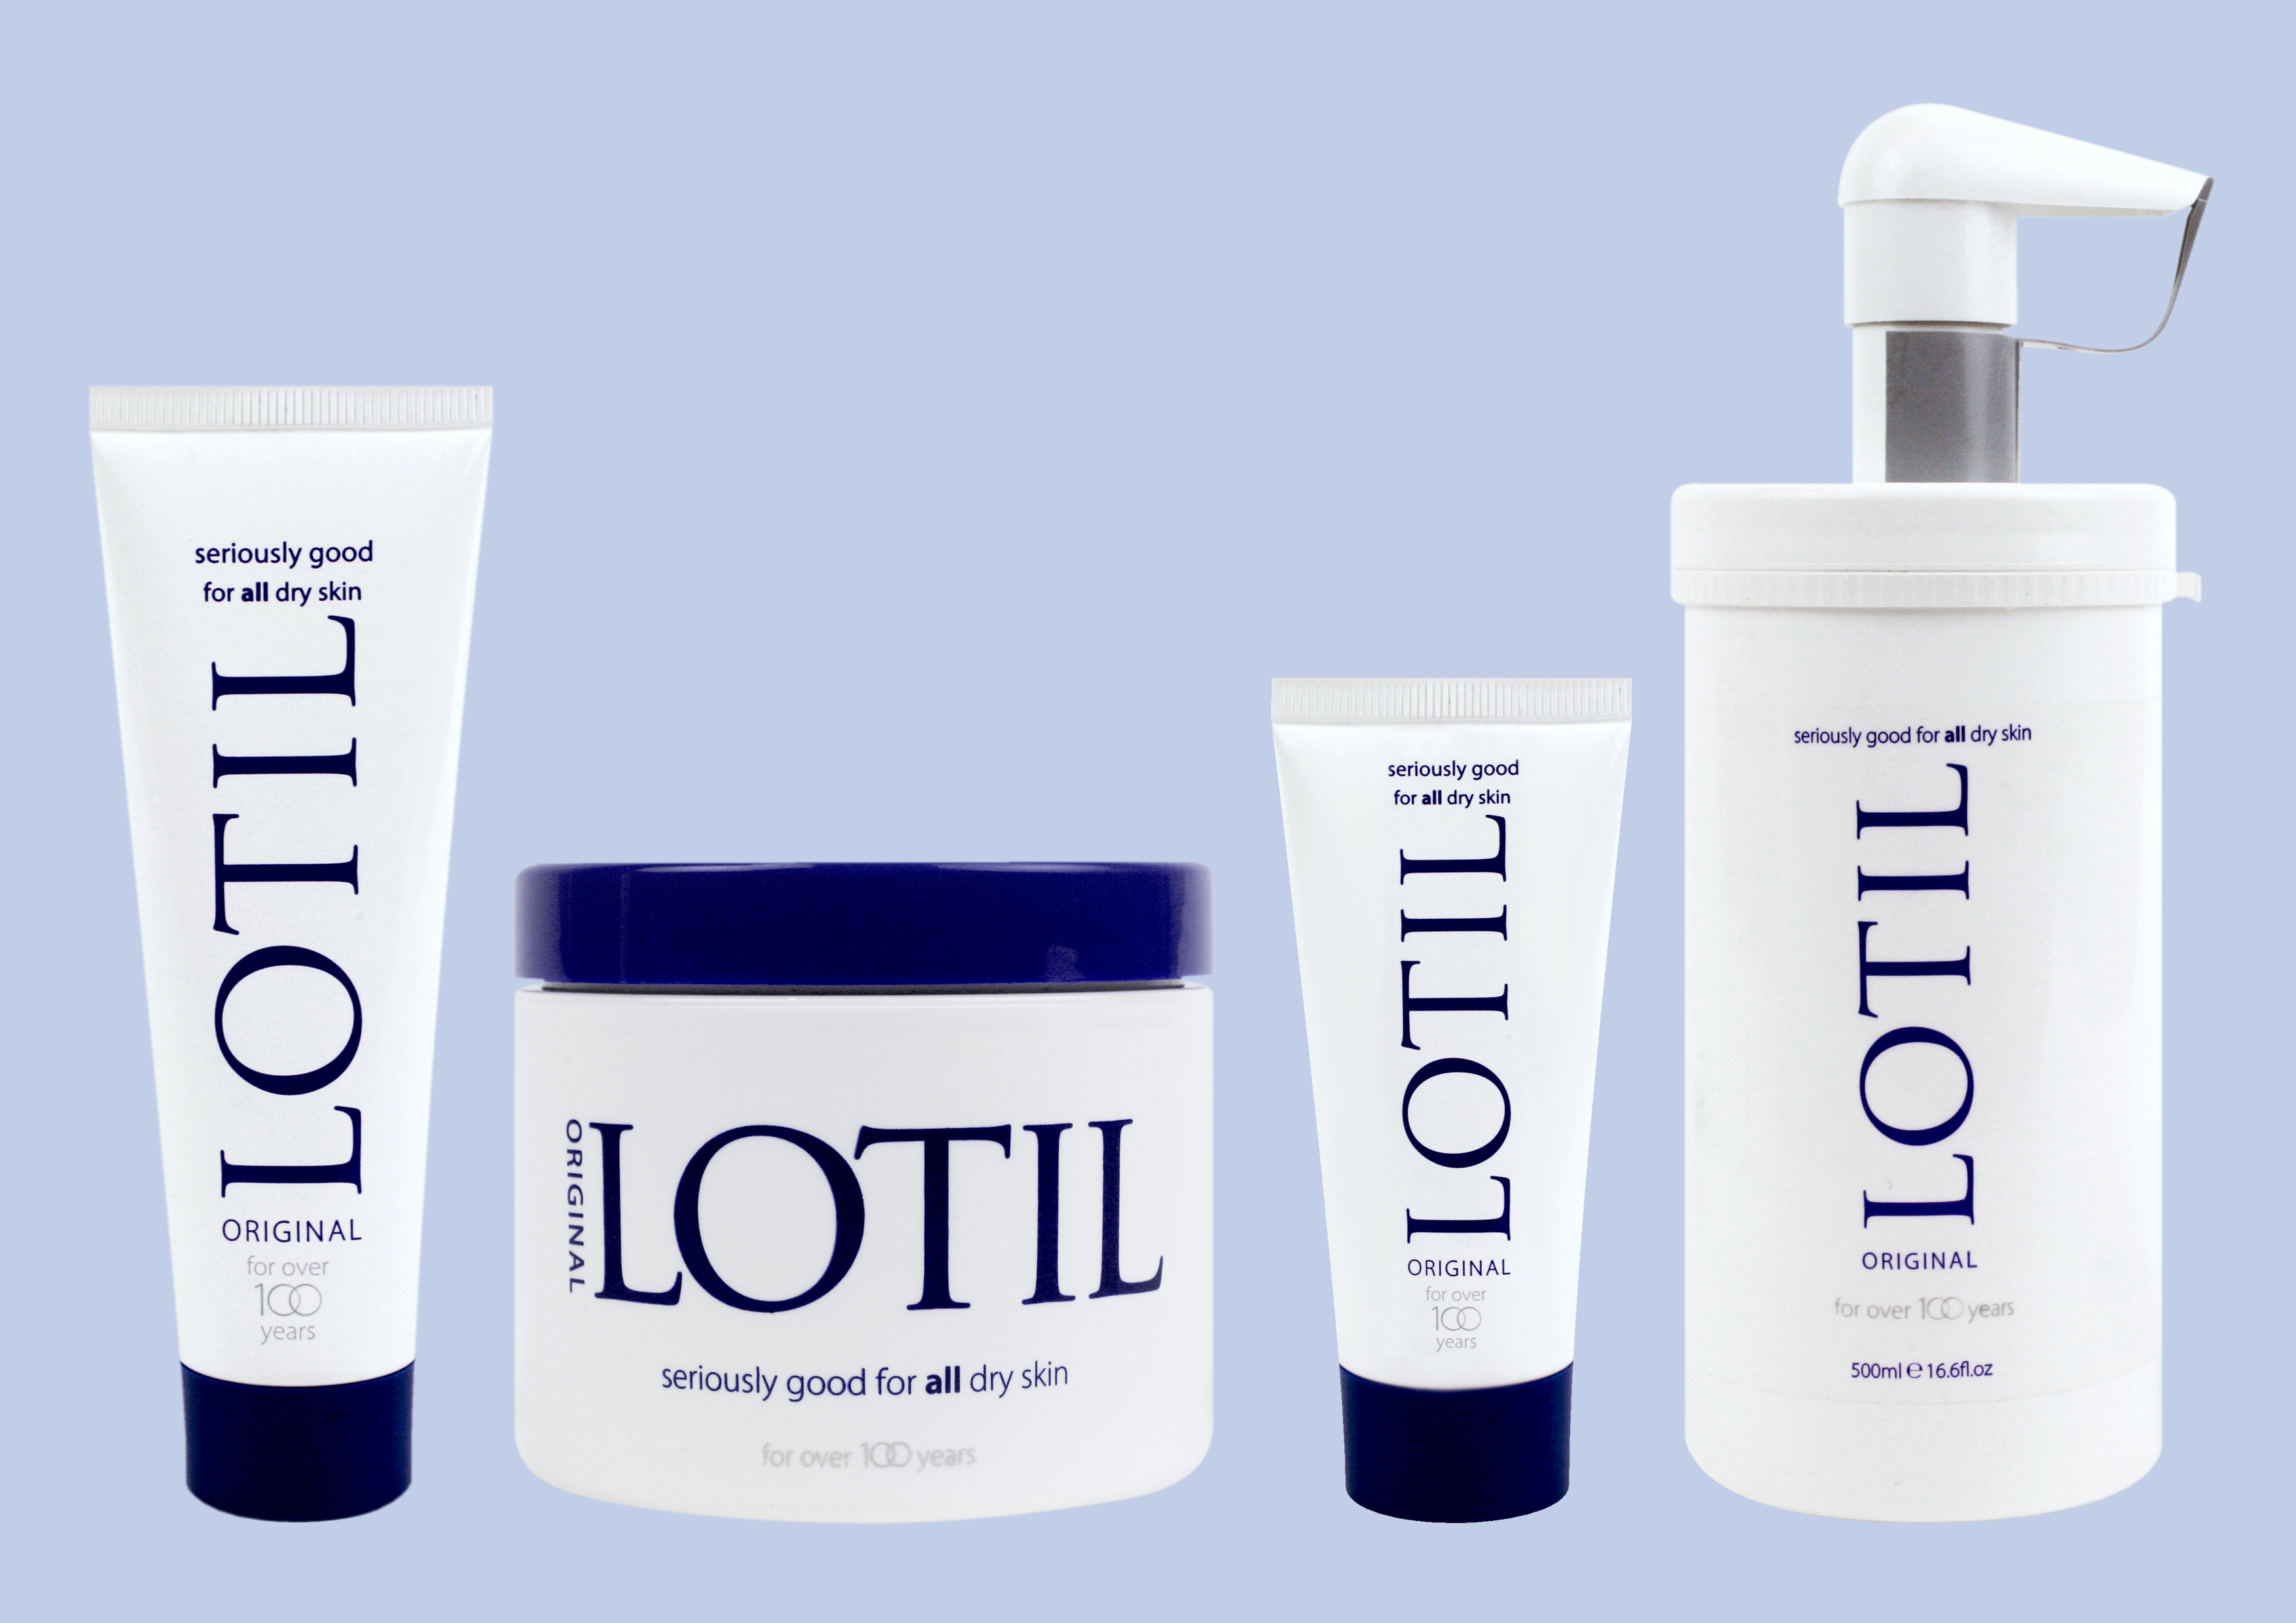 Lotil products